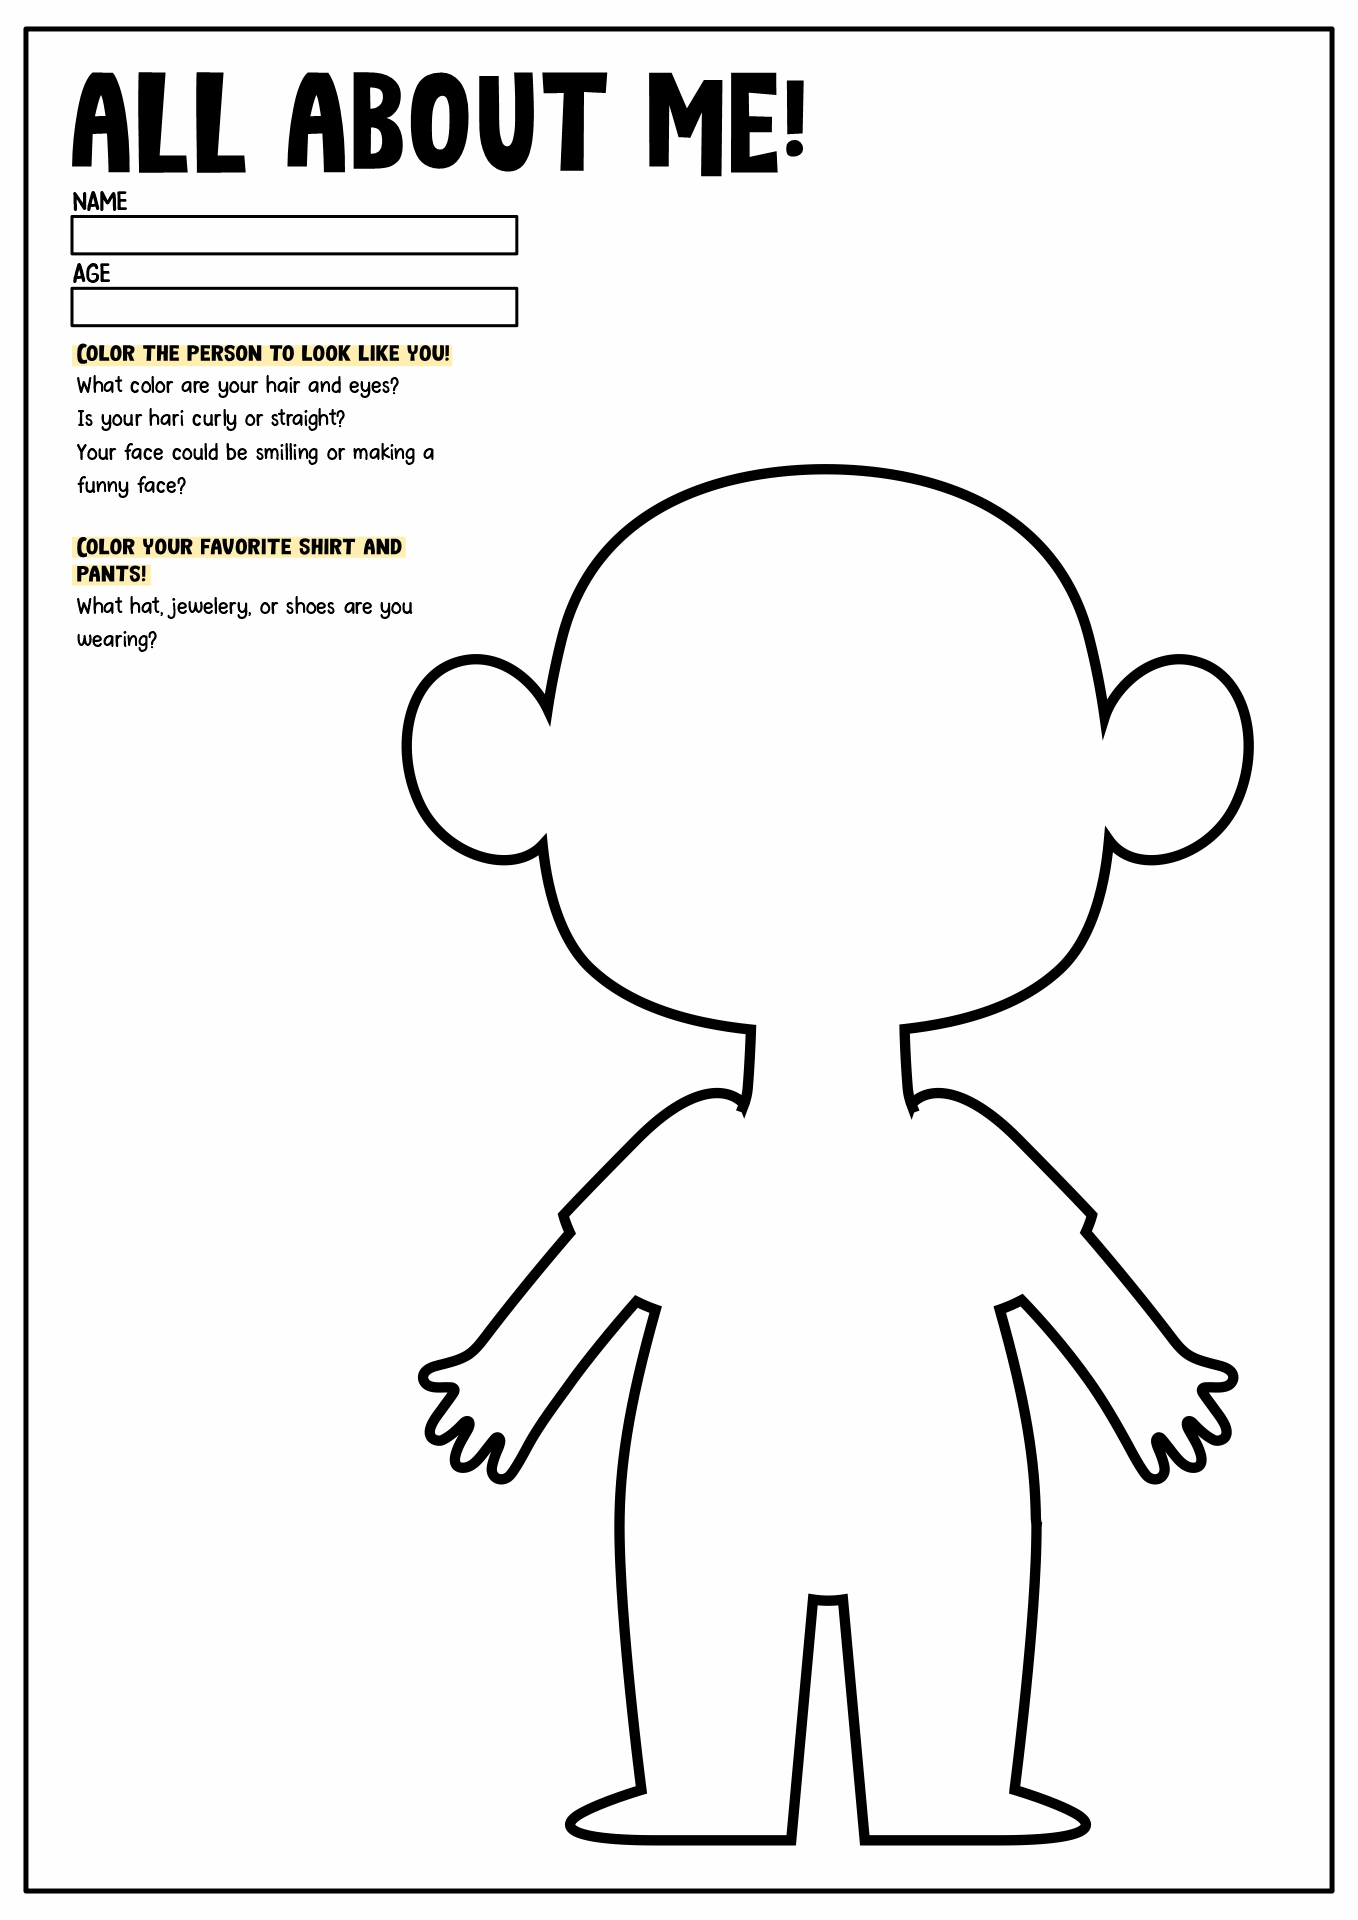 15-best-images-of-all-about-me-coloring-pages-worksheets-all-about-me-printable-sheet-all